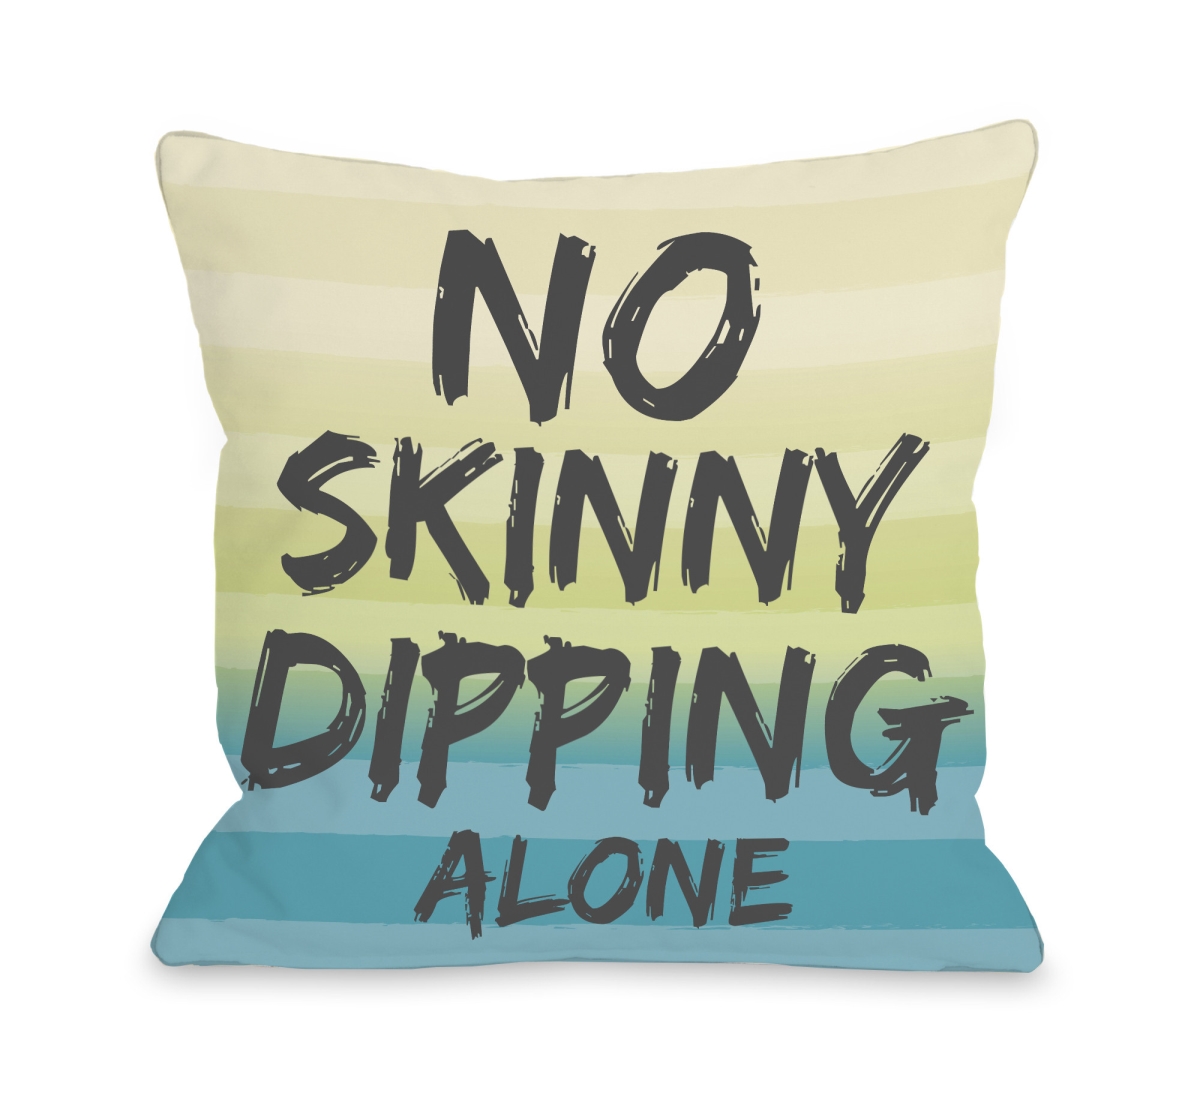 72236pl16o 16 X 16 In. No Skinny Dipping Alone Outdoor Pillow, Turquoise & Multicolor